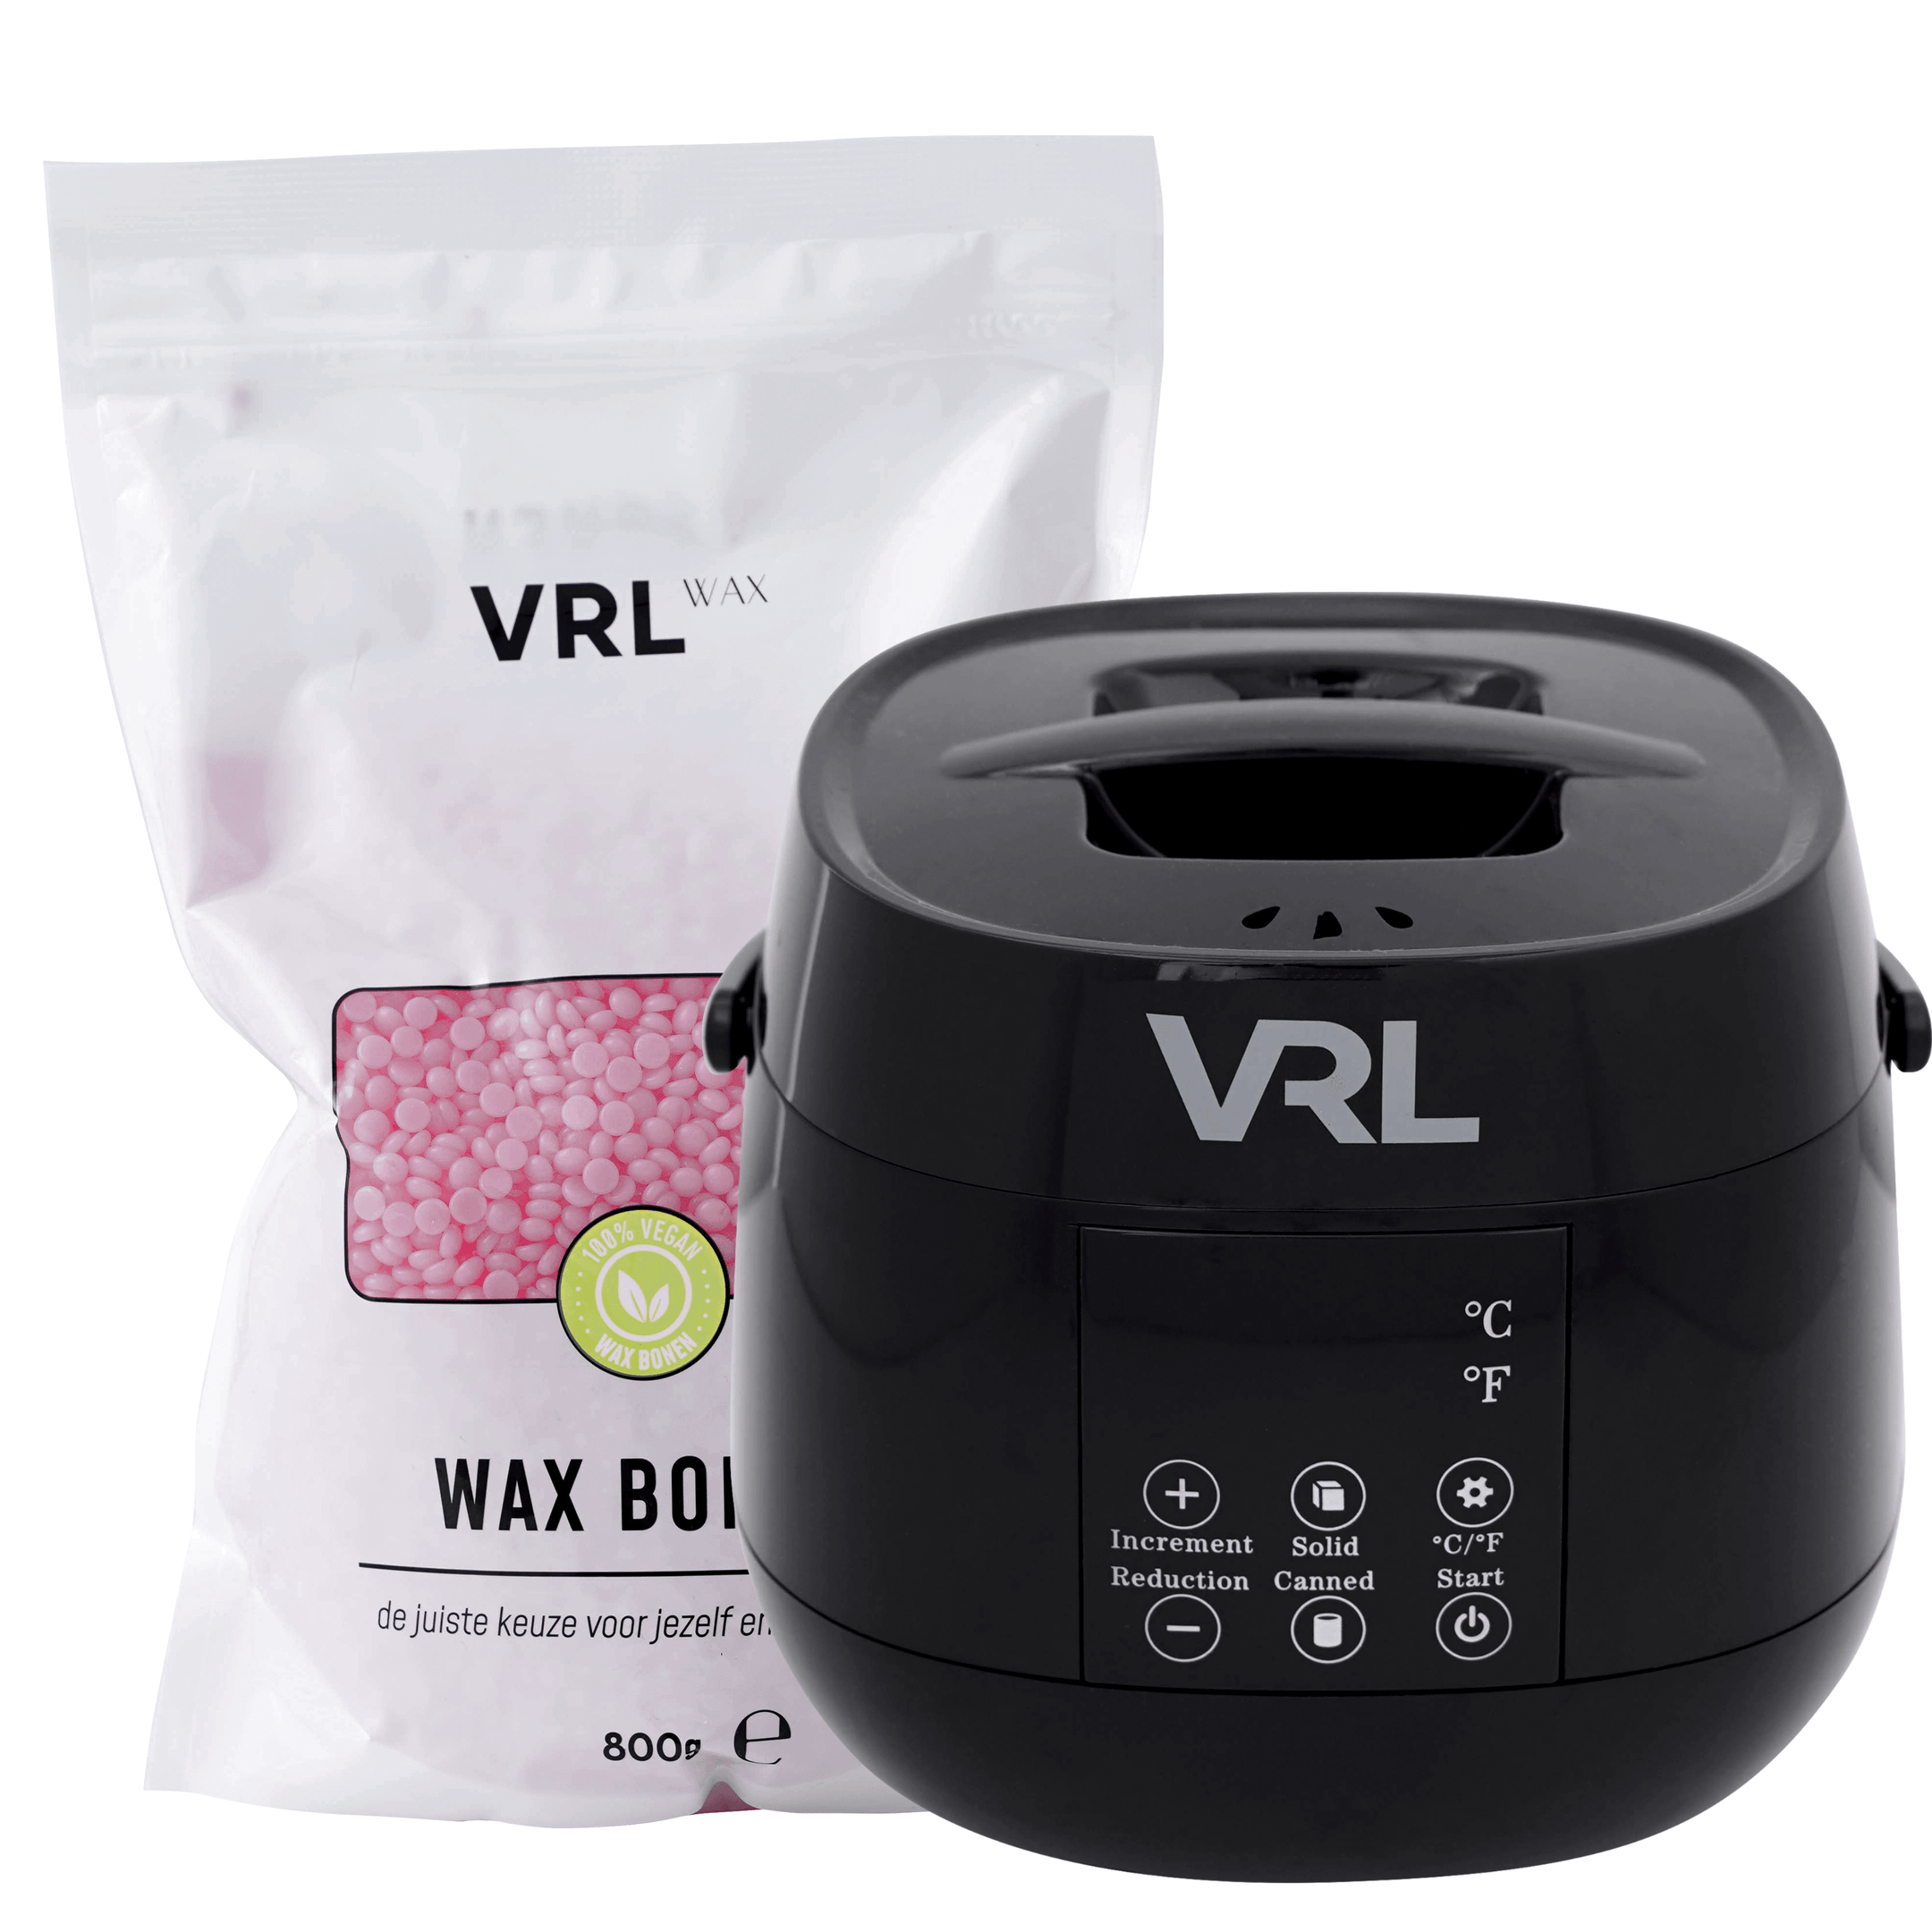 VRL Smart Wax Device - Complete with Crystal Orange Wax Beans